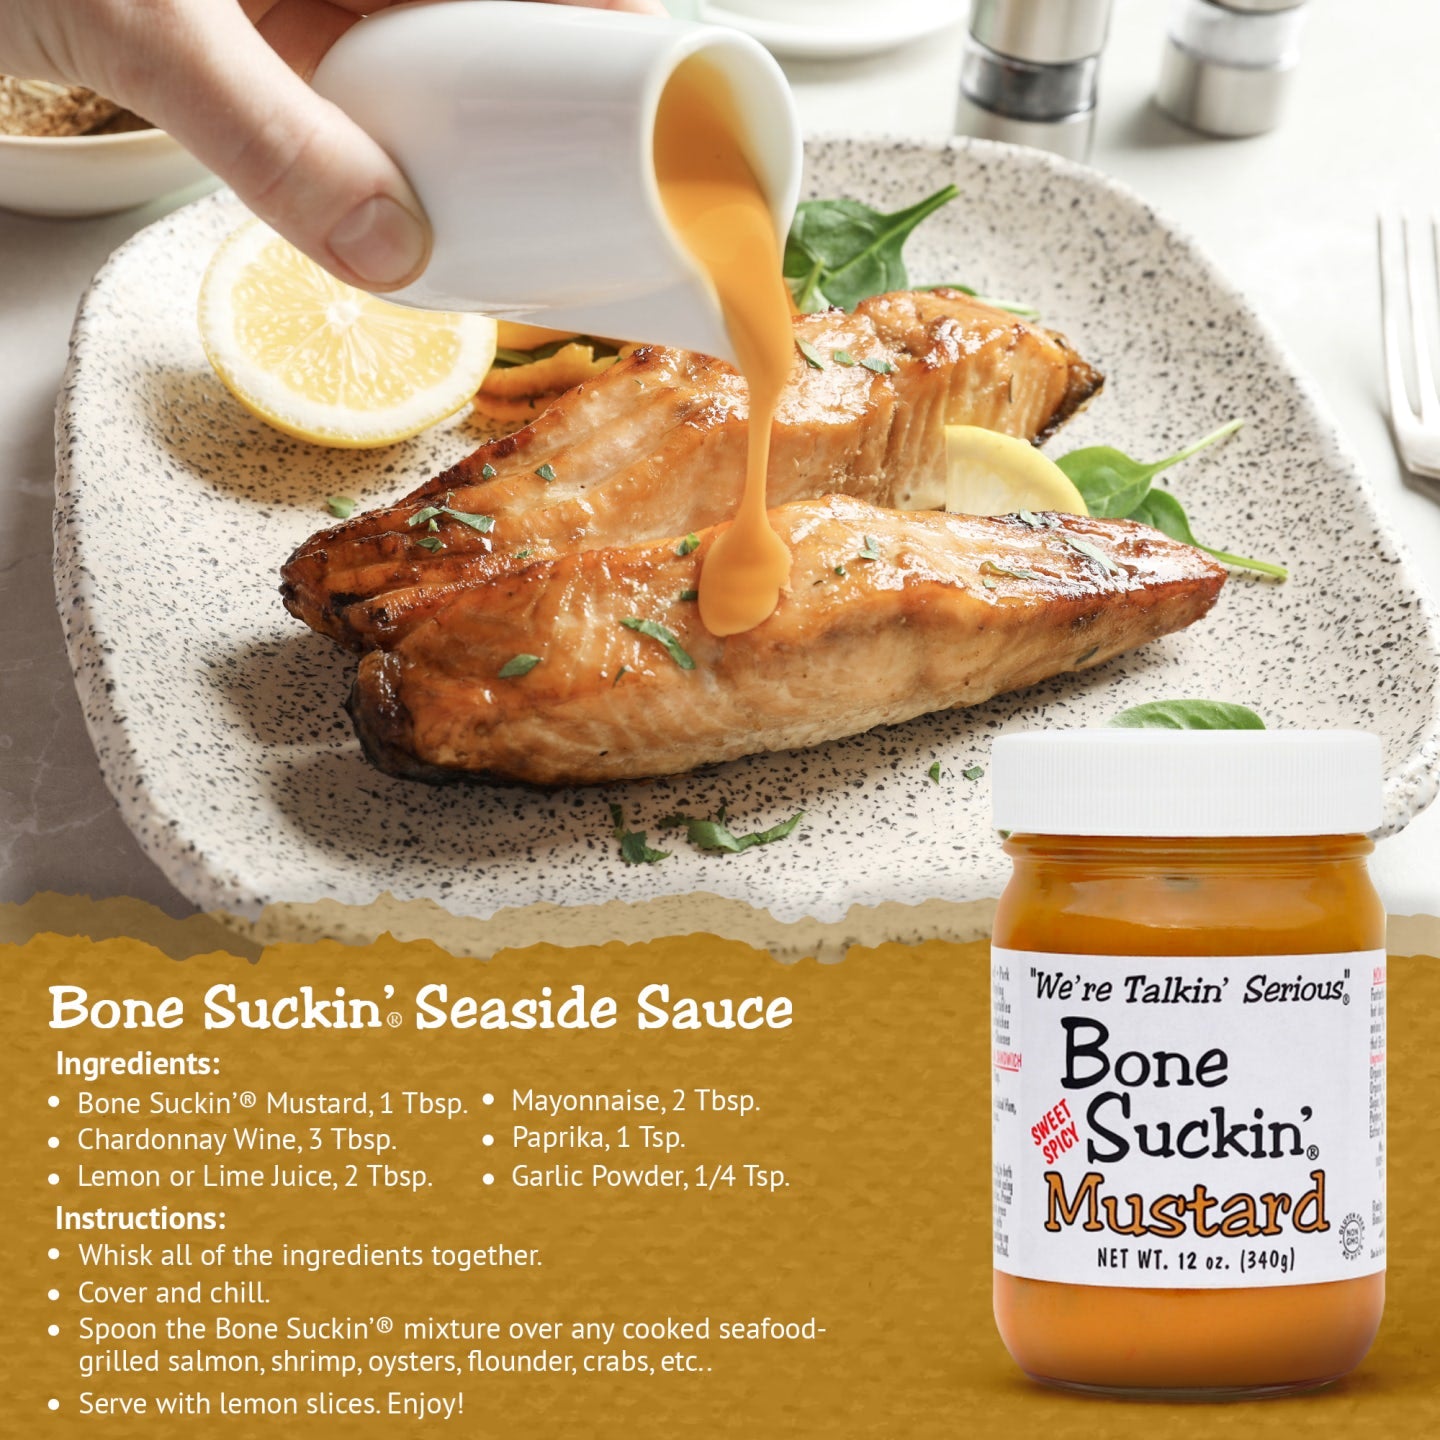 Bone Suckin’® Seaside Sauce Recipe  Ingredients  Bone Suckin’® Mustard, 1 Tbsp. Chardonnay Wine, 3 Tbsp. Lemon or Lime juice, 2 Tbsp. Mayonnaise, 2 Tbsp. Paprika, 1 Tsp. Garlic Powder, 1/4 Tsp. Instructions  Whisk together. Cover and chill. Spoon over any cooked seafood- grilled salmon, shrimp, oysters, flounder, crabs, etc.. Serve with lemon slices.